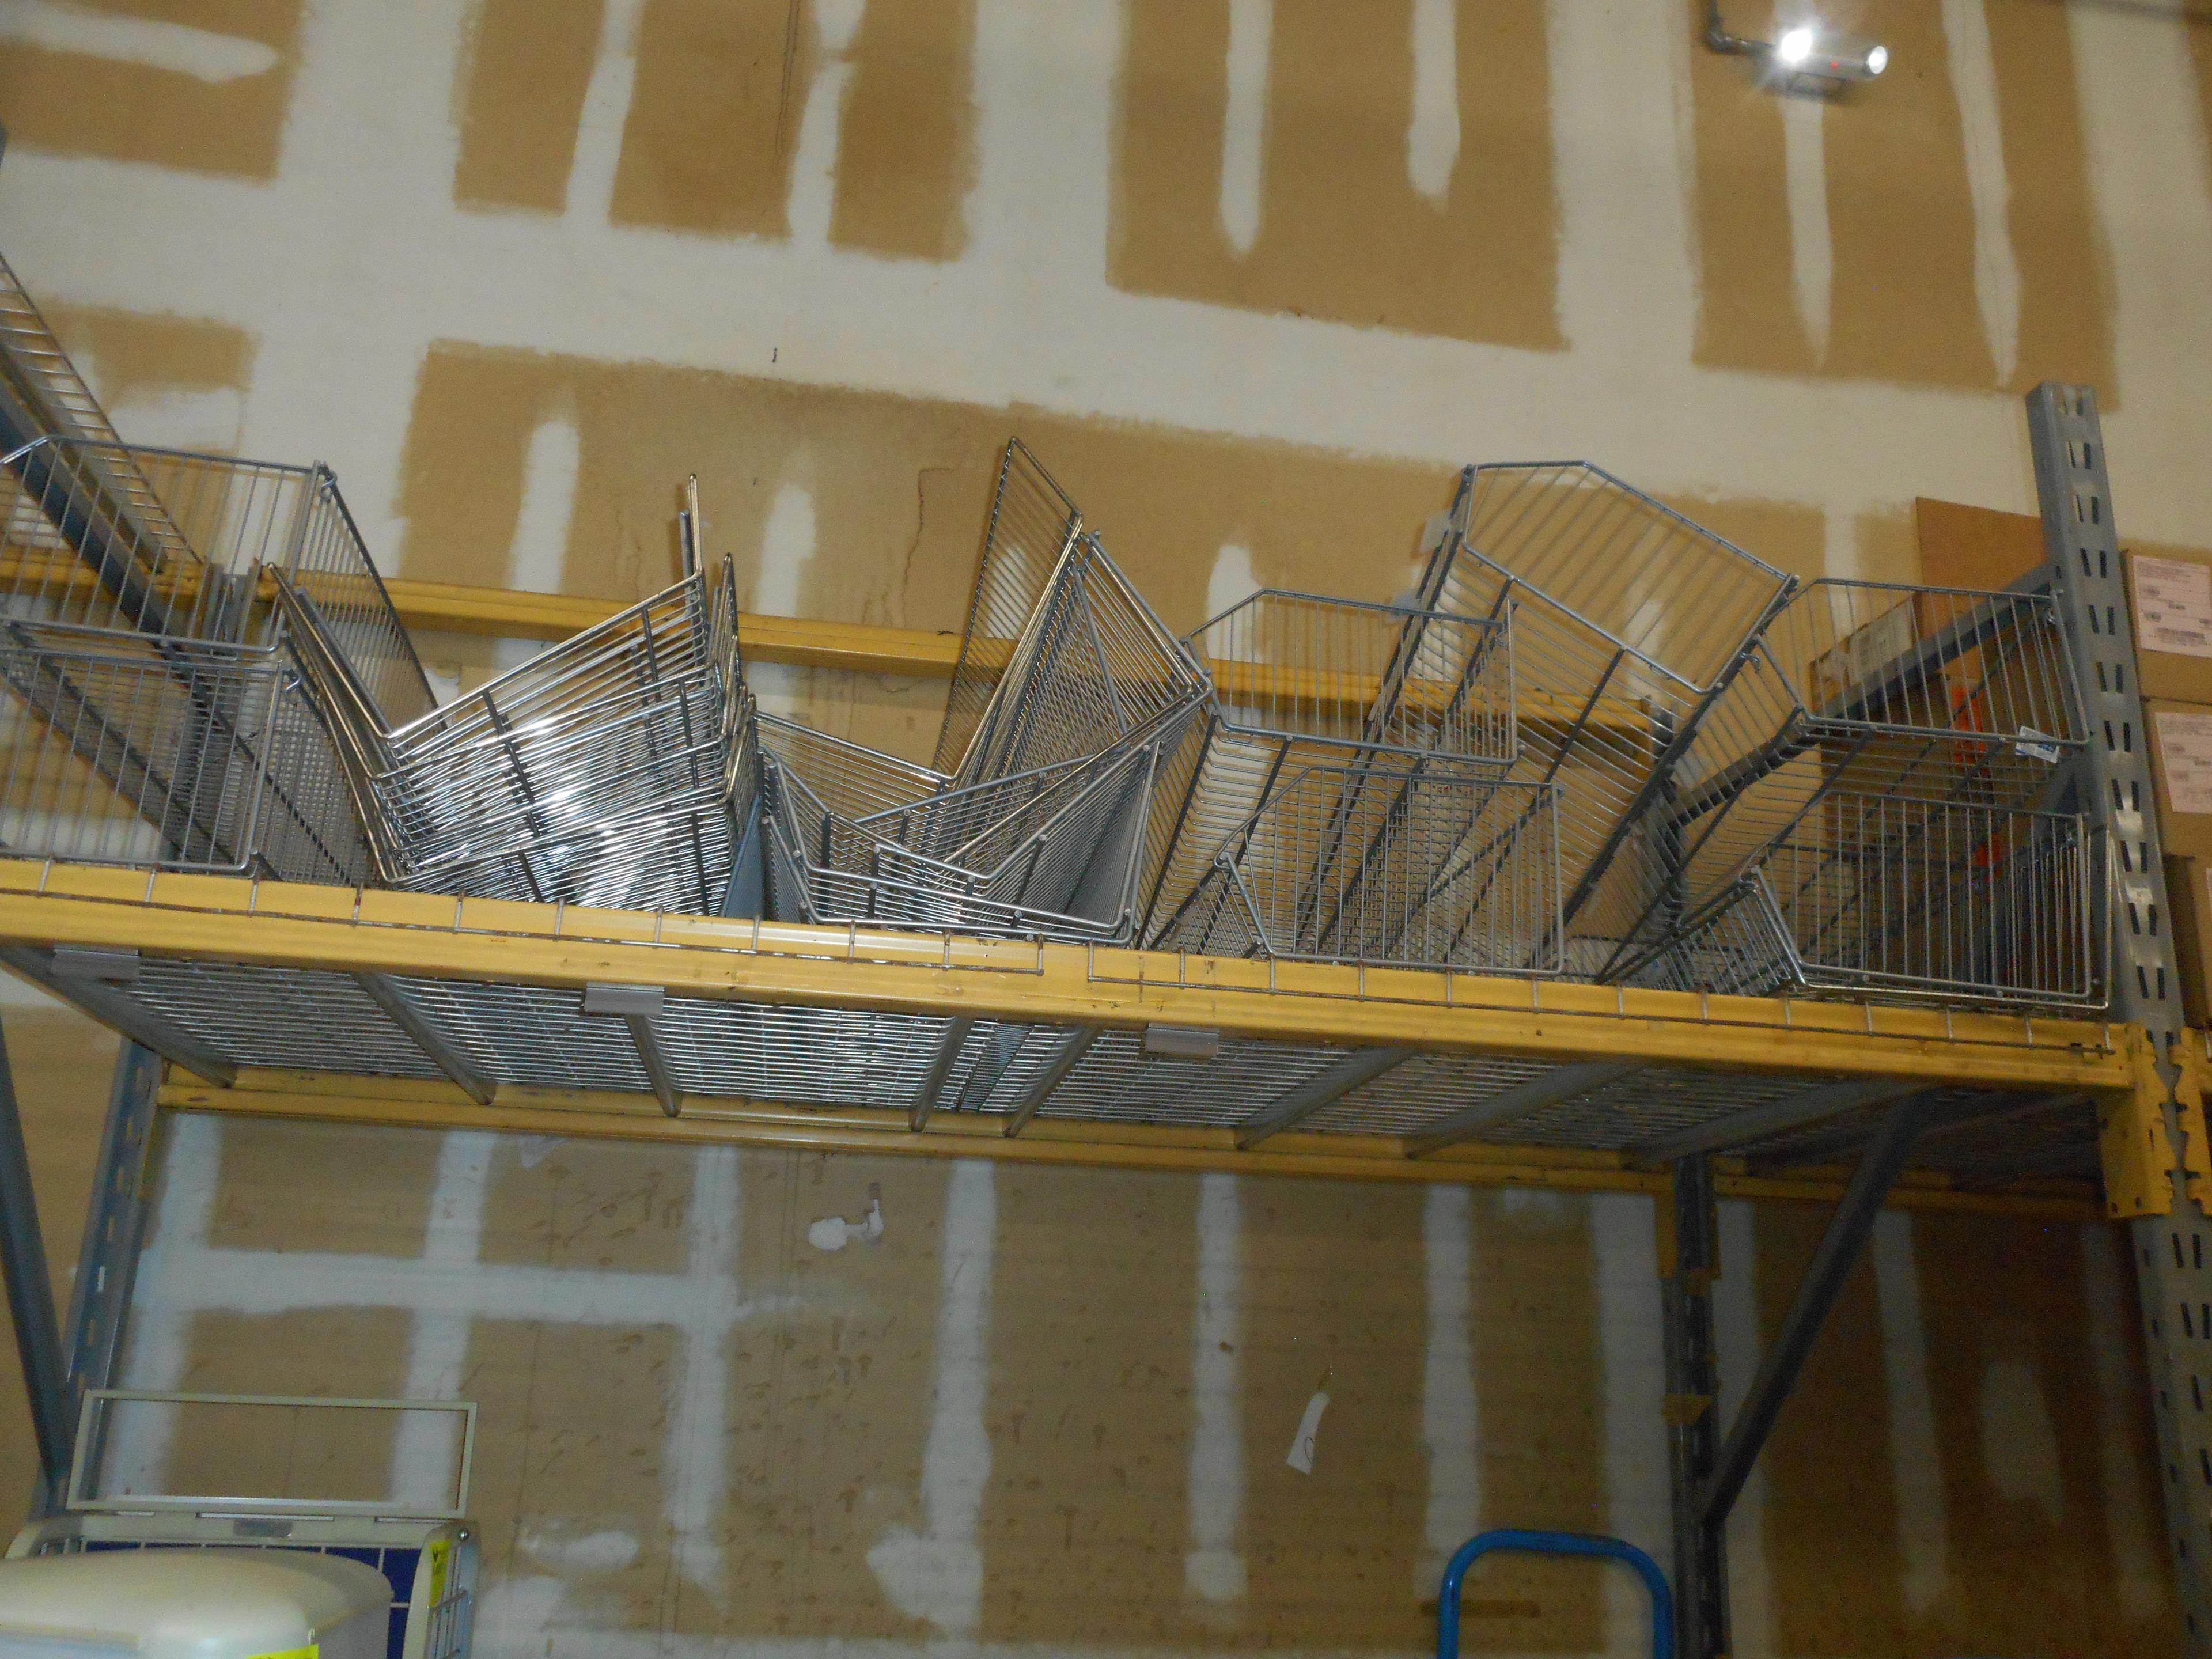 CONTENTS OF UPPER PALLET RACKING (SHELVING AND MISCELLANEOUS)